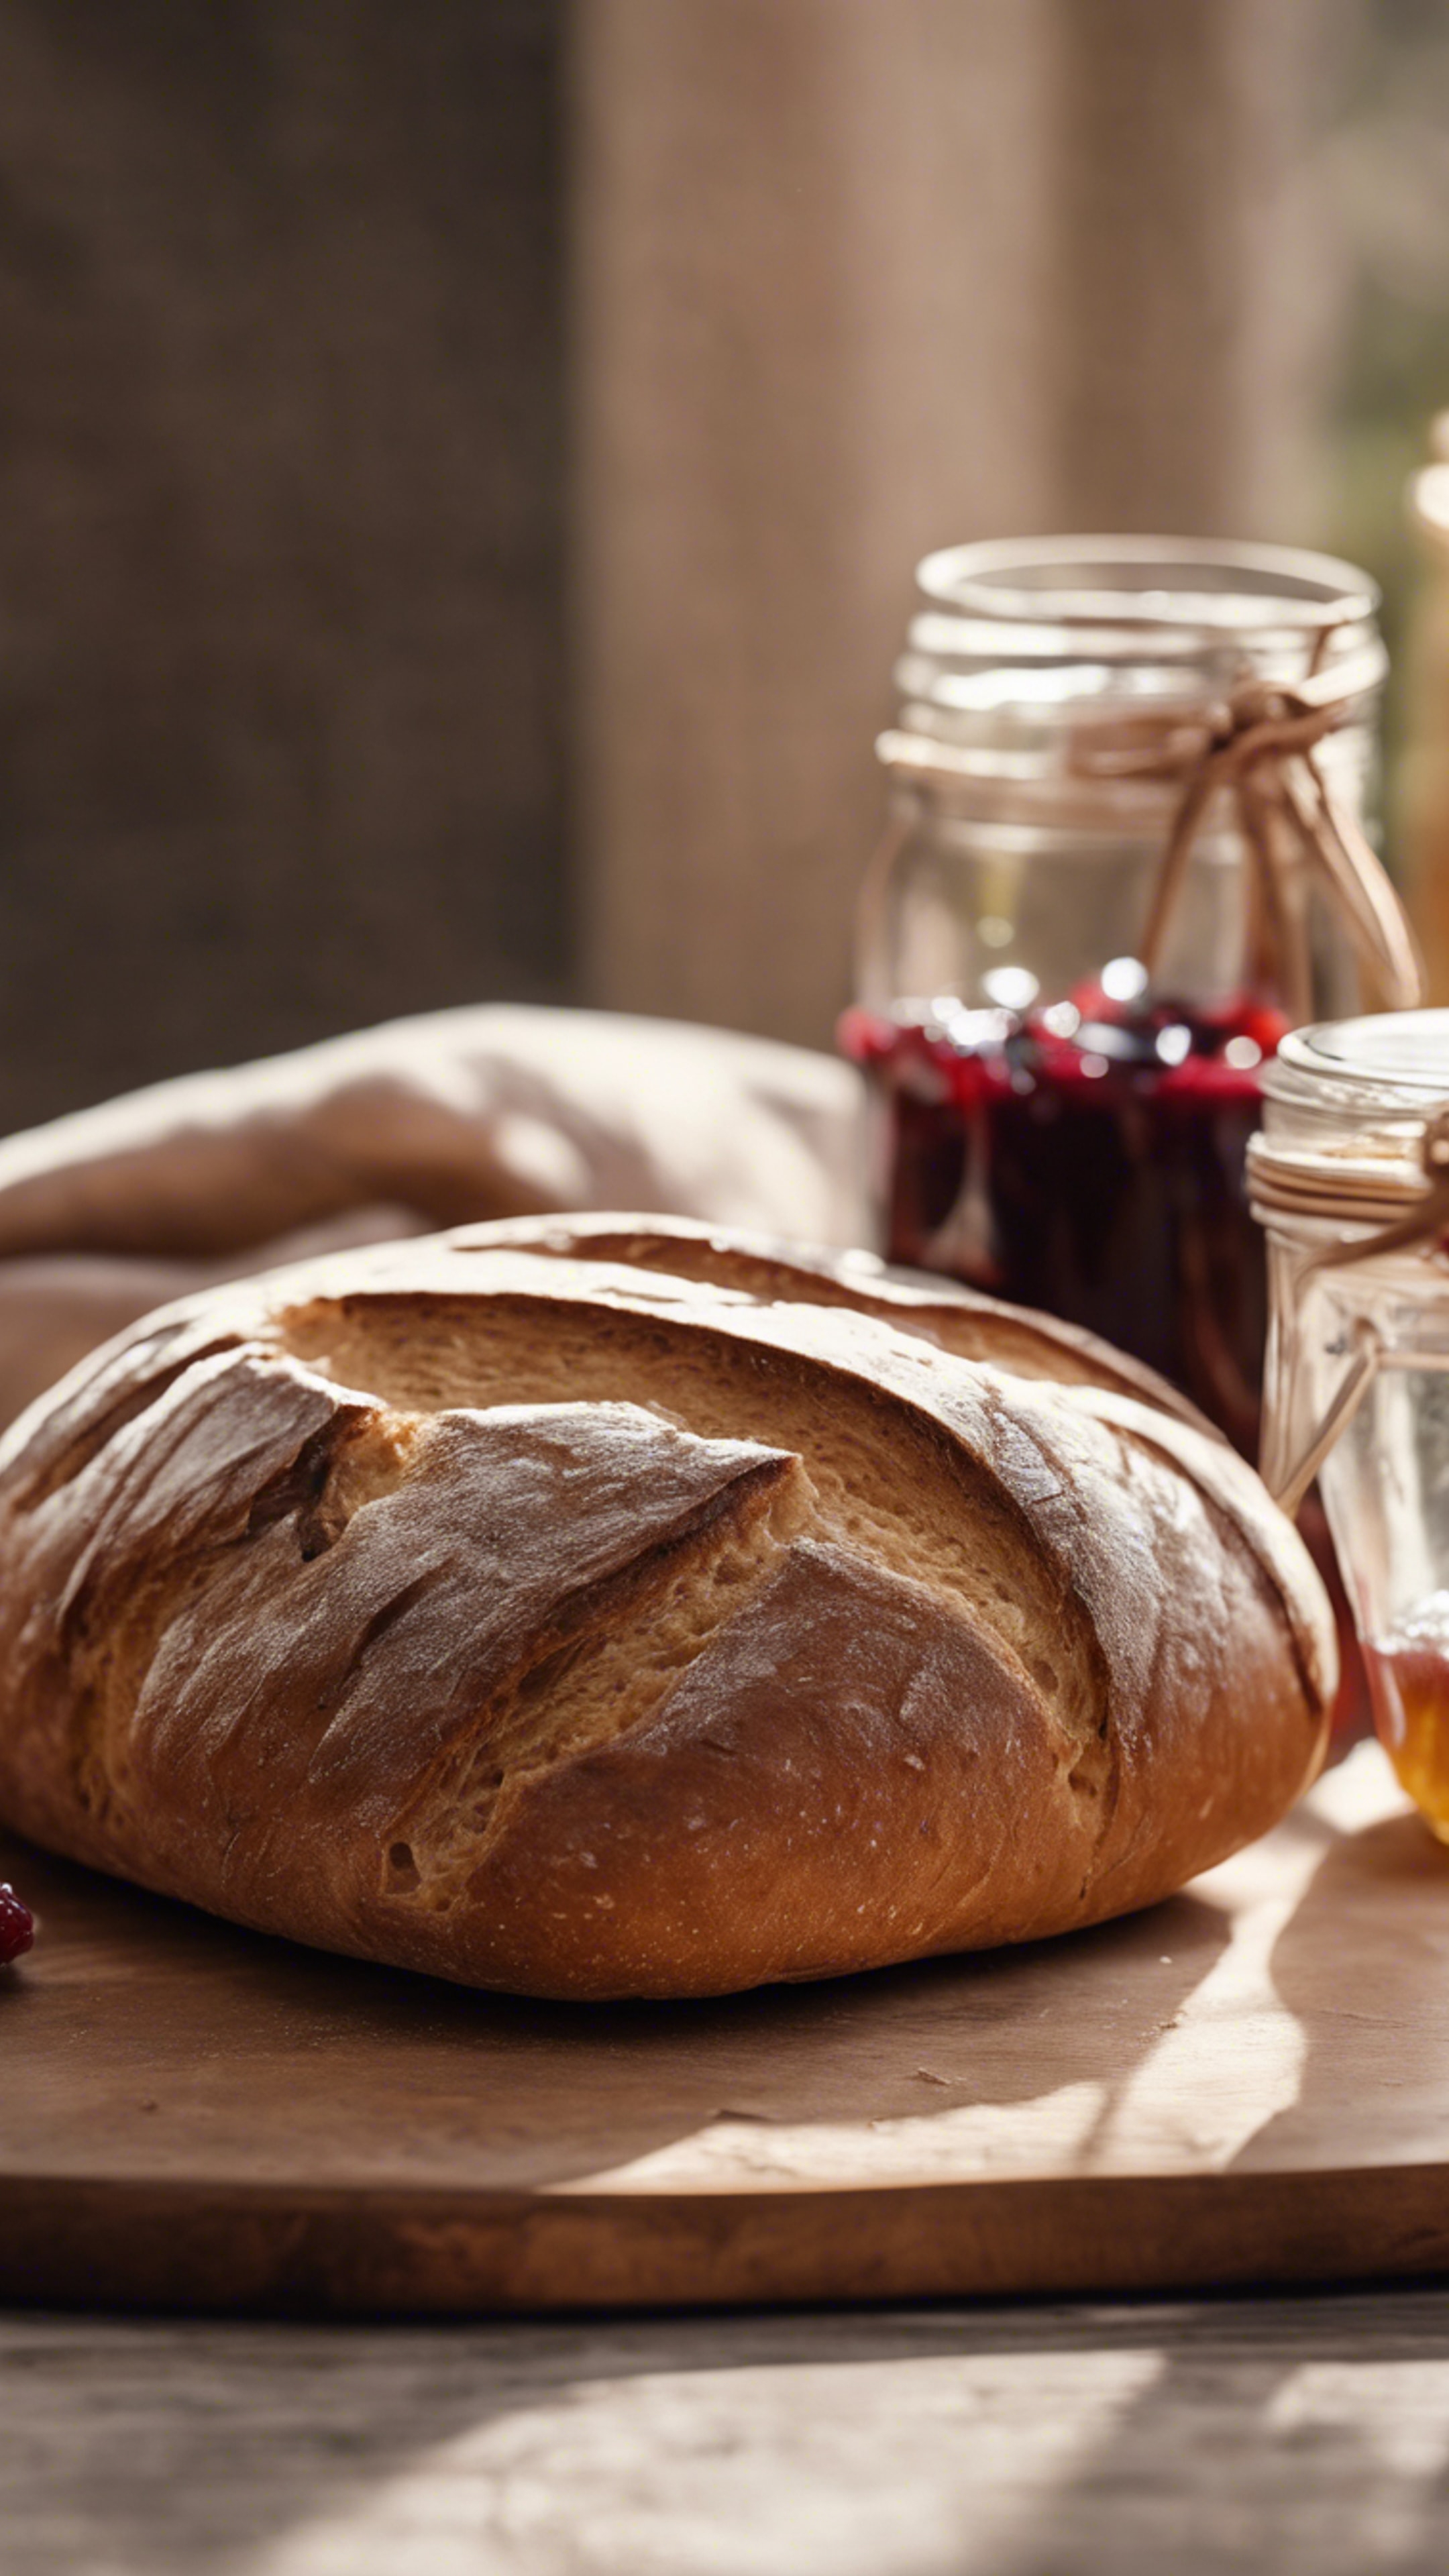 A close-up of a freshly baked bread sitting on a wooden cutting board, next to a jar of homemade jam. Wallpaper[9ebf491f88854369a221]